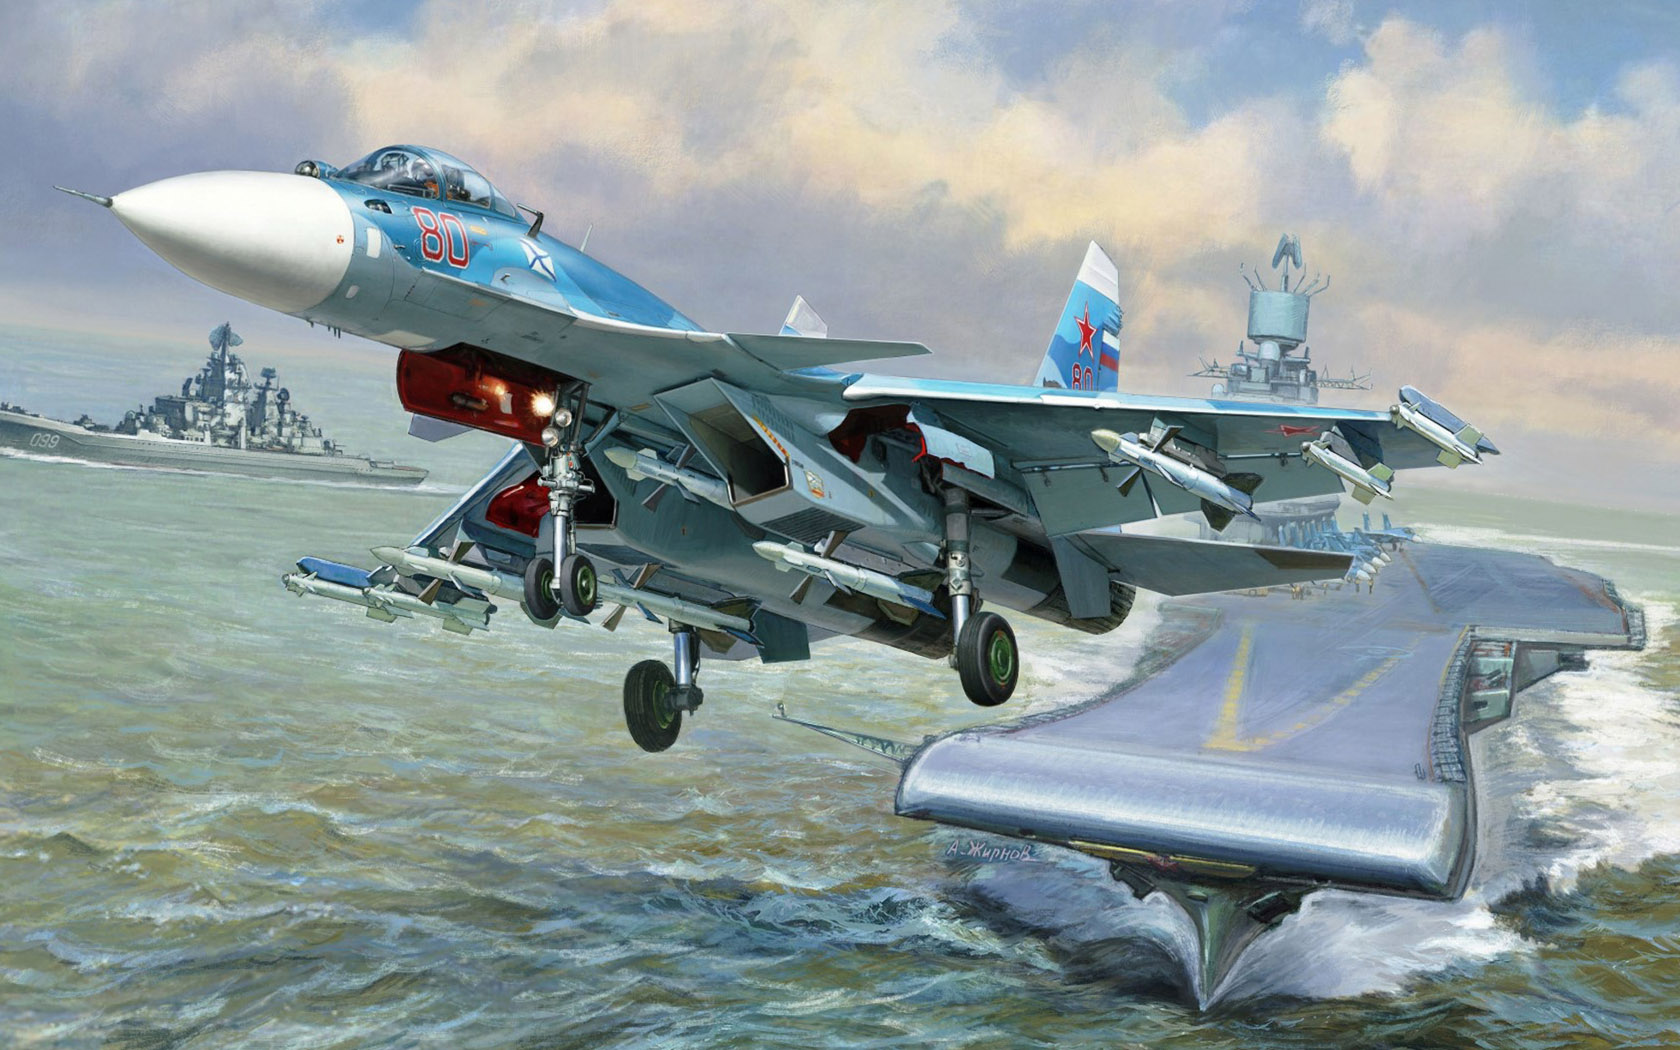 General 1680x1050 aircraft flying sea warship military military vehicle artwork missiles clouds water waves Russian Navy aircraft carrier take-off Andrei Zhirnov Boxart Sukhoi Su-30